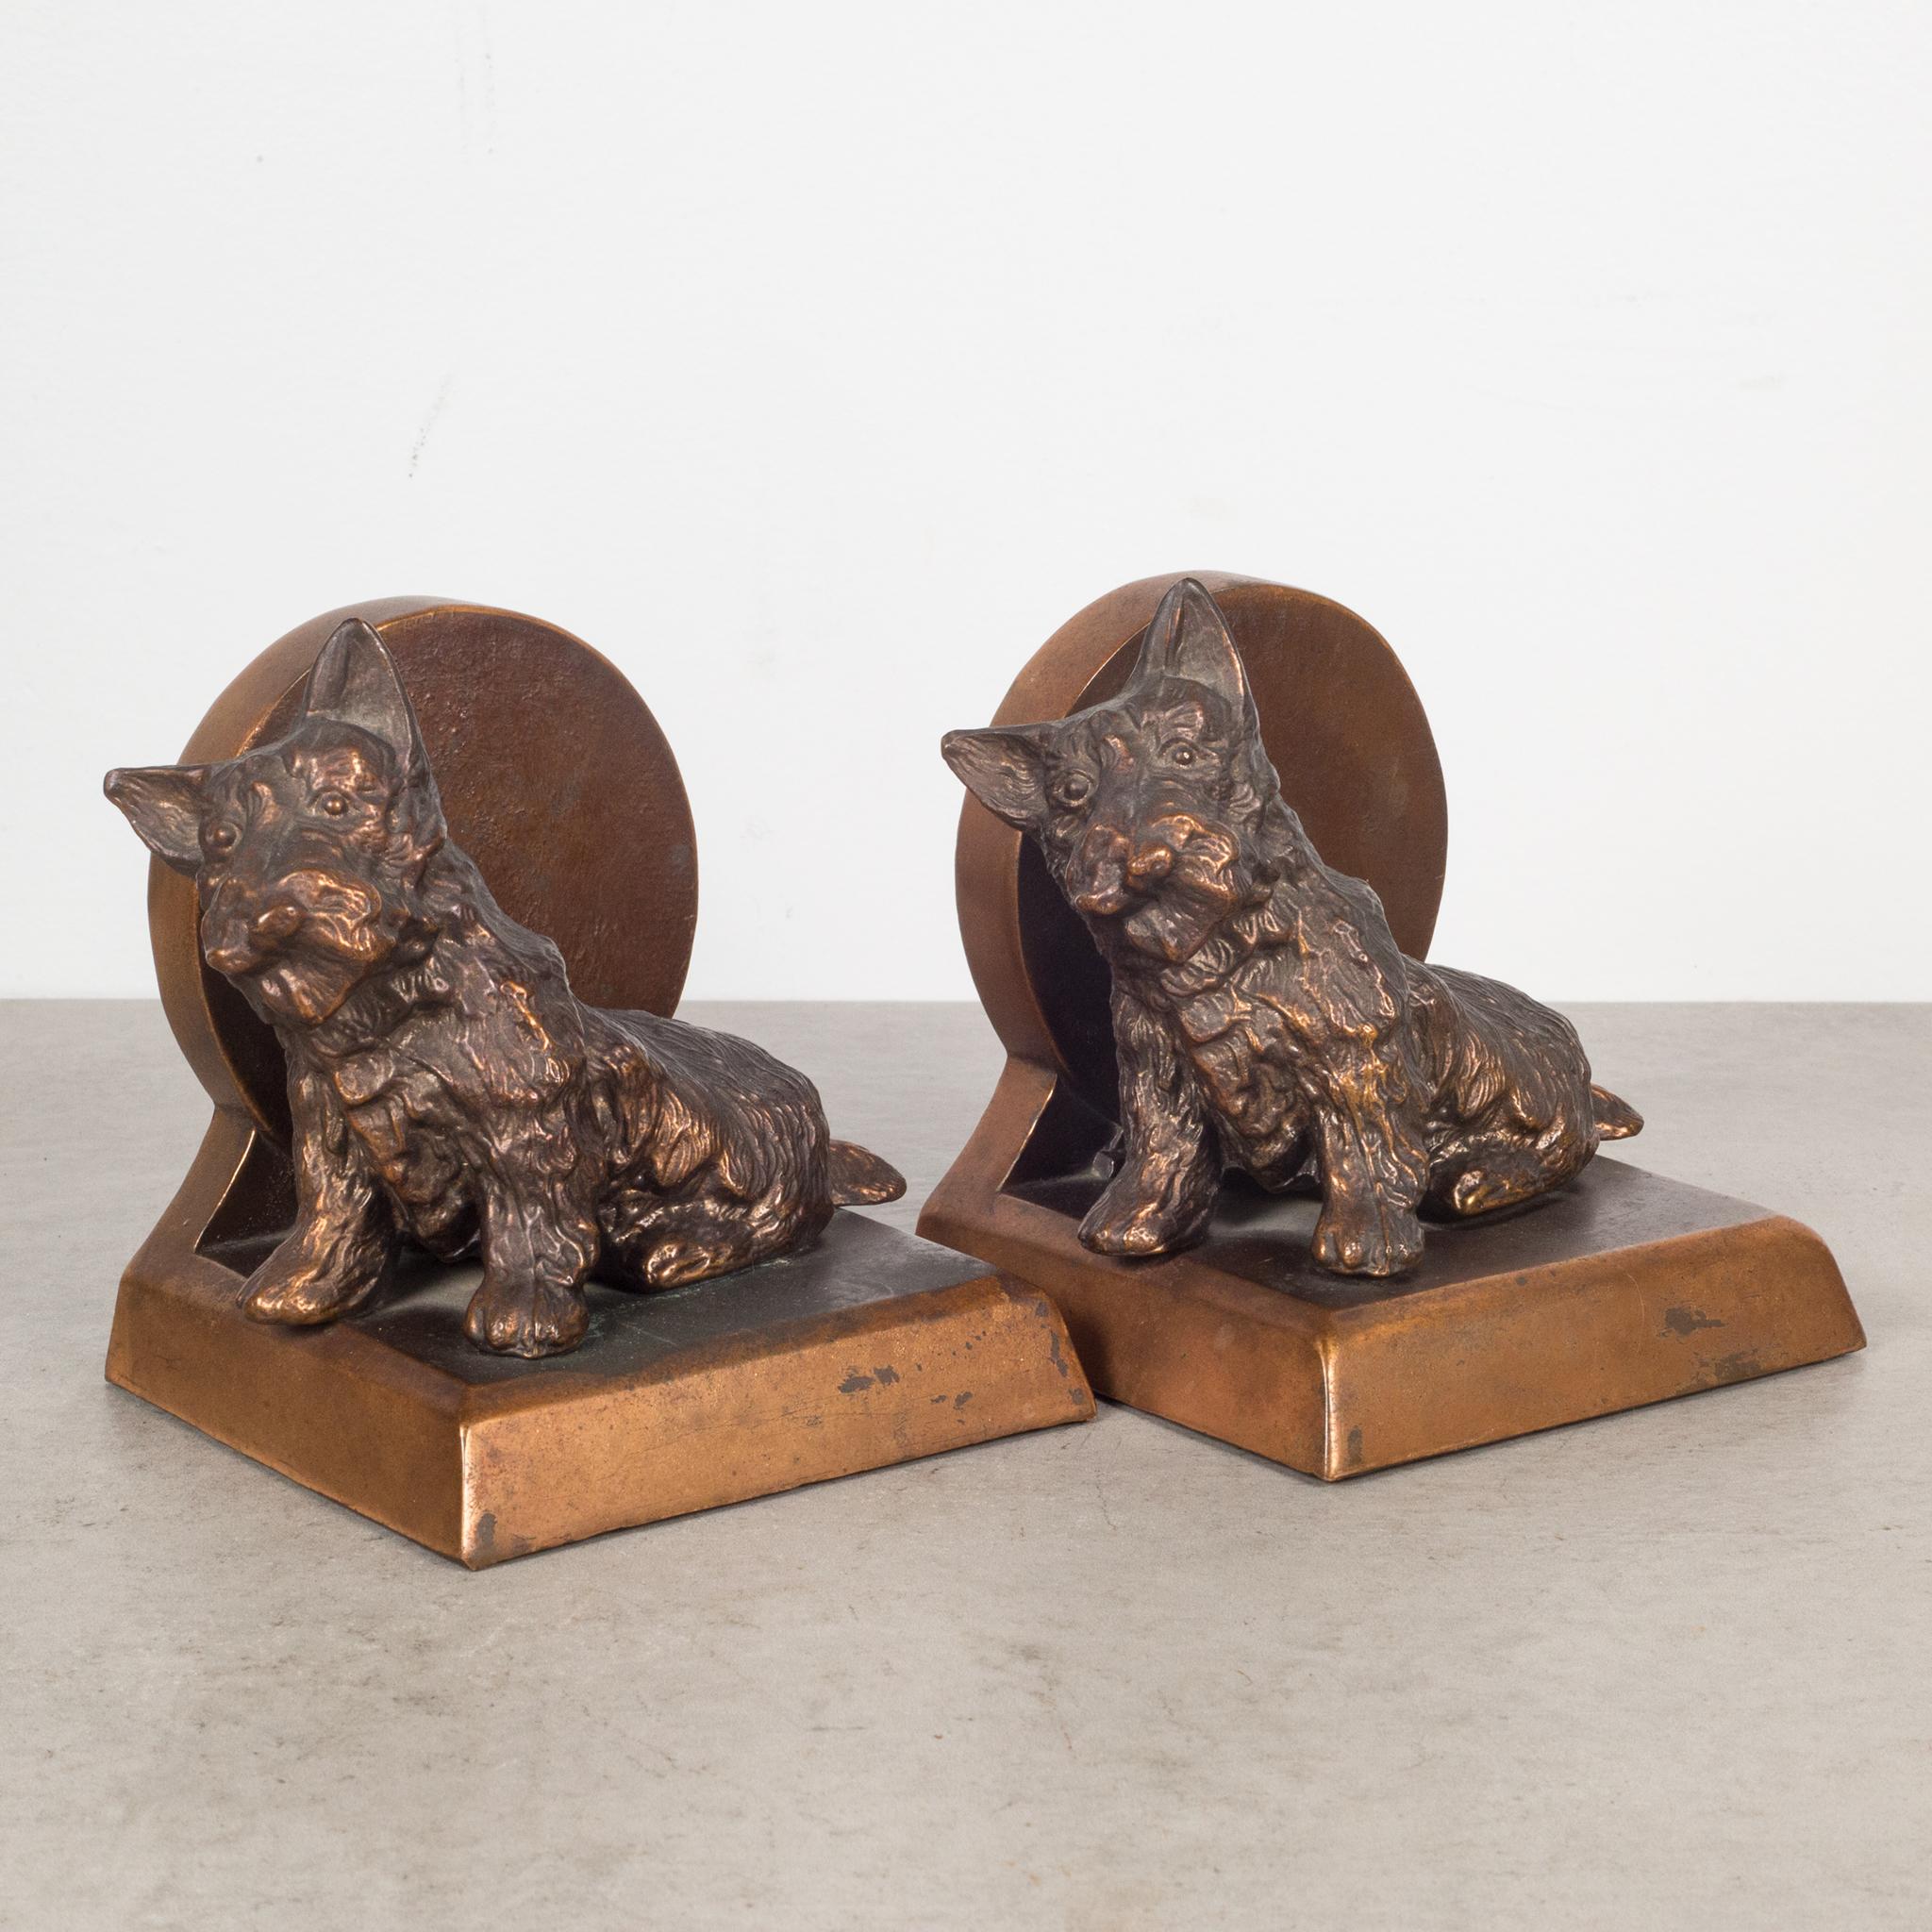 About

A vintage pair of bronze plated Scotty Dog bookends on pedestals with original felt.

Creator Unknown.
Date of manufacture c.1940s.
Materials and techniques bronze plate, felt.
Condition good. Wear consistent with age and